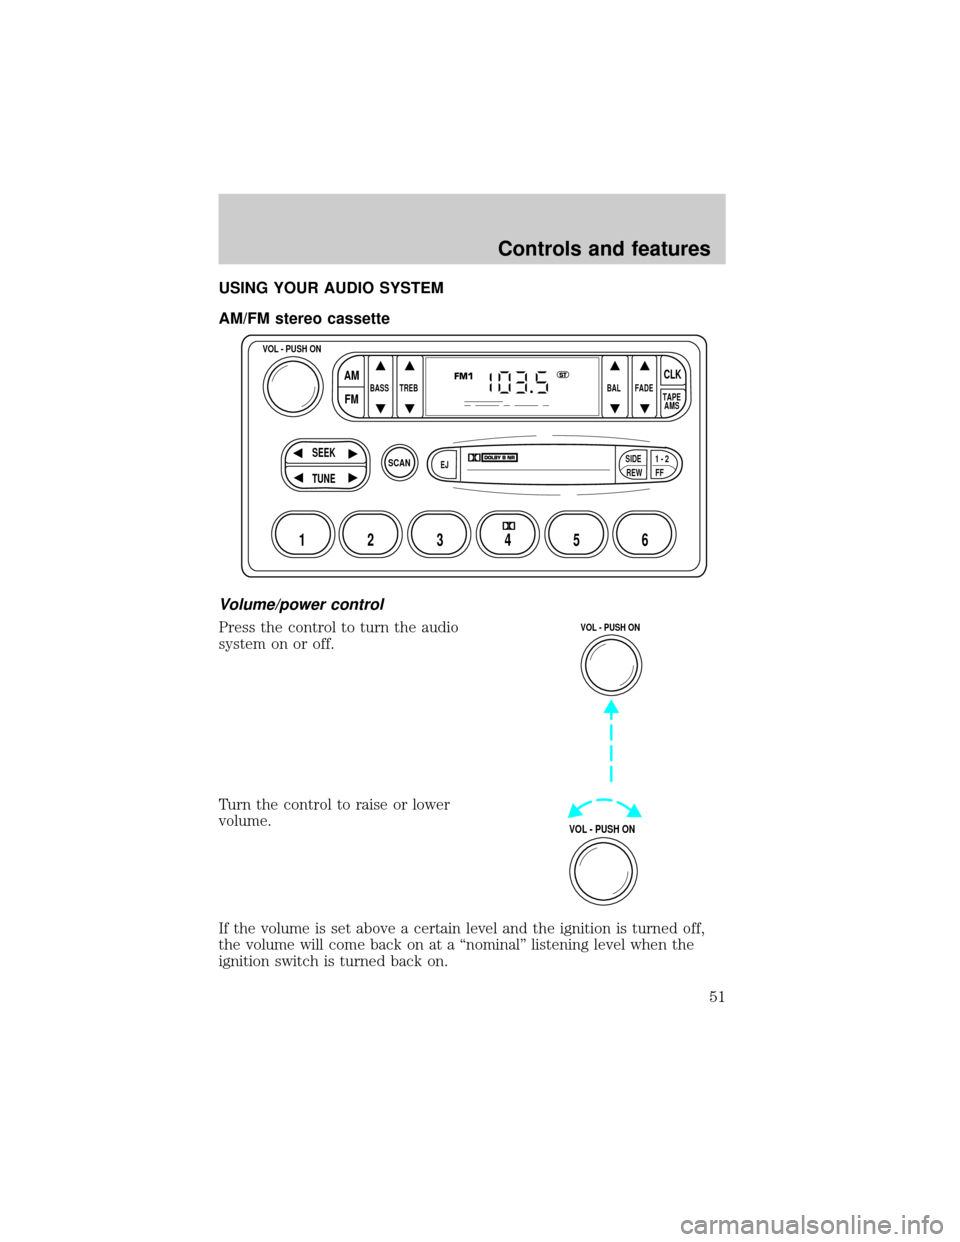 FORD EXPLORER 2002 3.G Owners Manual USING YOUR AUDIO SYSTEM
AM/FM stereo cassette
Volume/power control
Press the control to turn the audio
system on or off.
Turn the control to raise or lower
volume.
If the volume is set above a certain